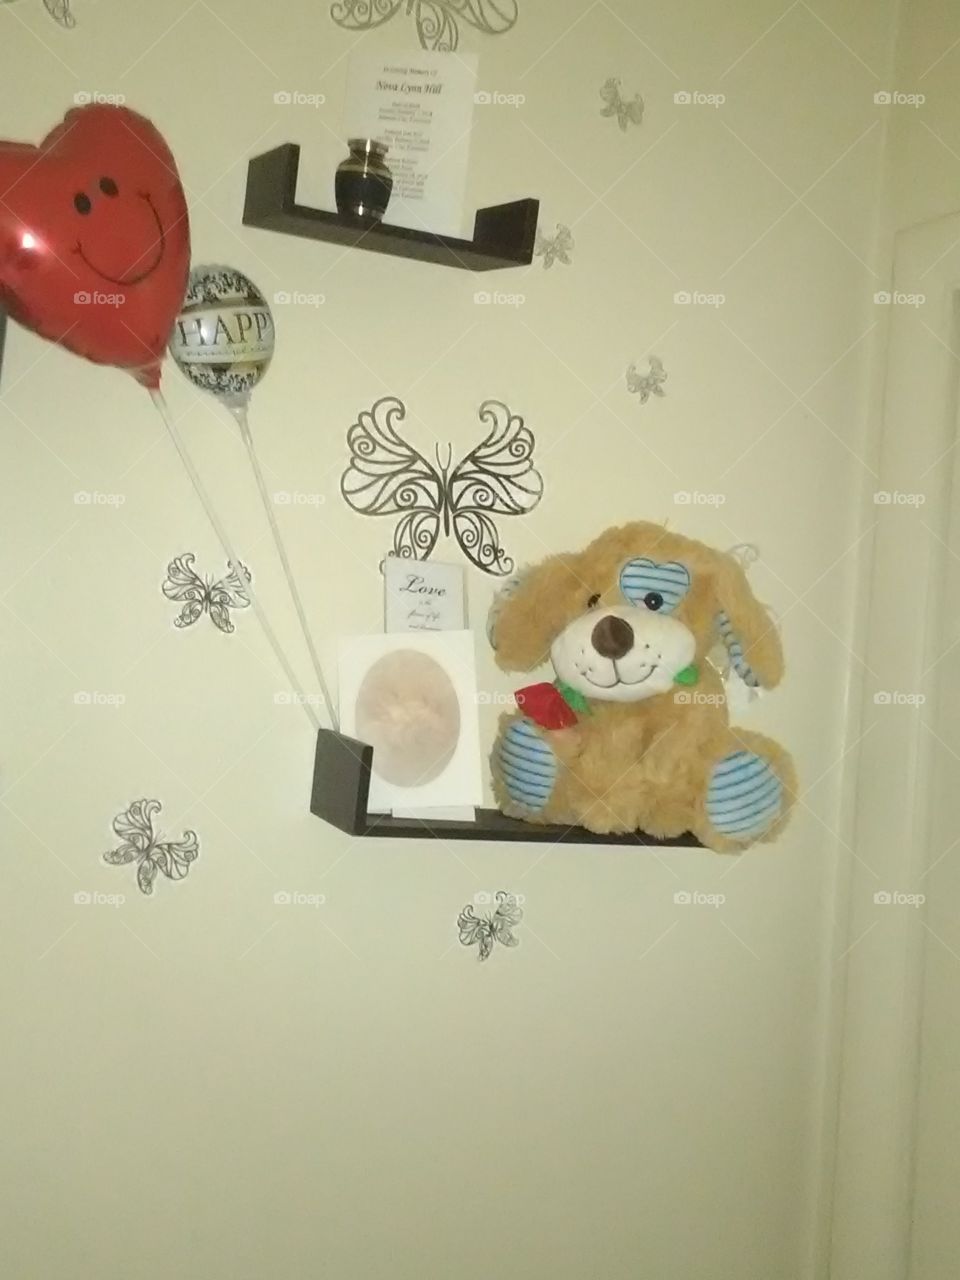 Memorial wall very beautiful teddy bear with balloon and their lovely daughter